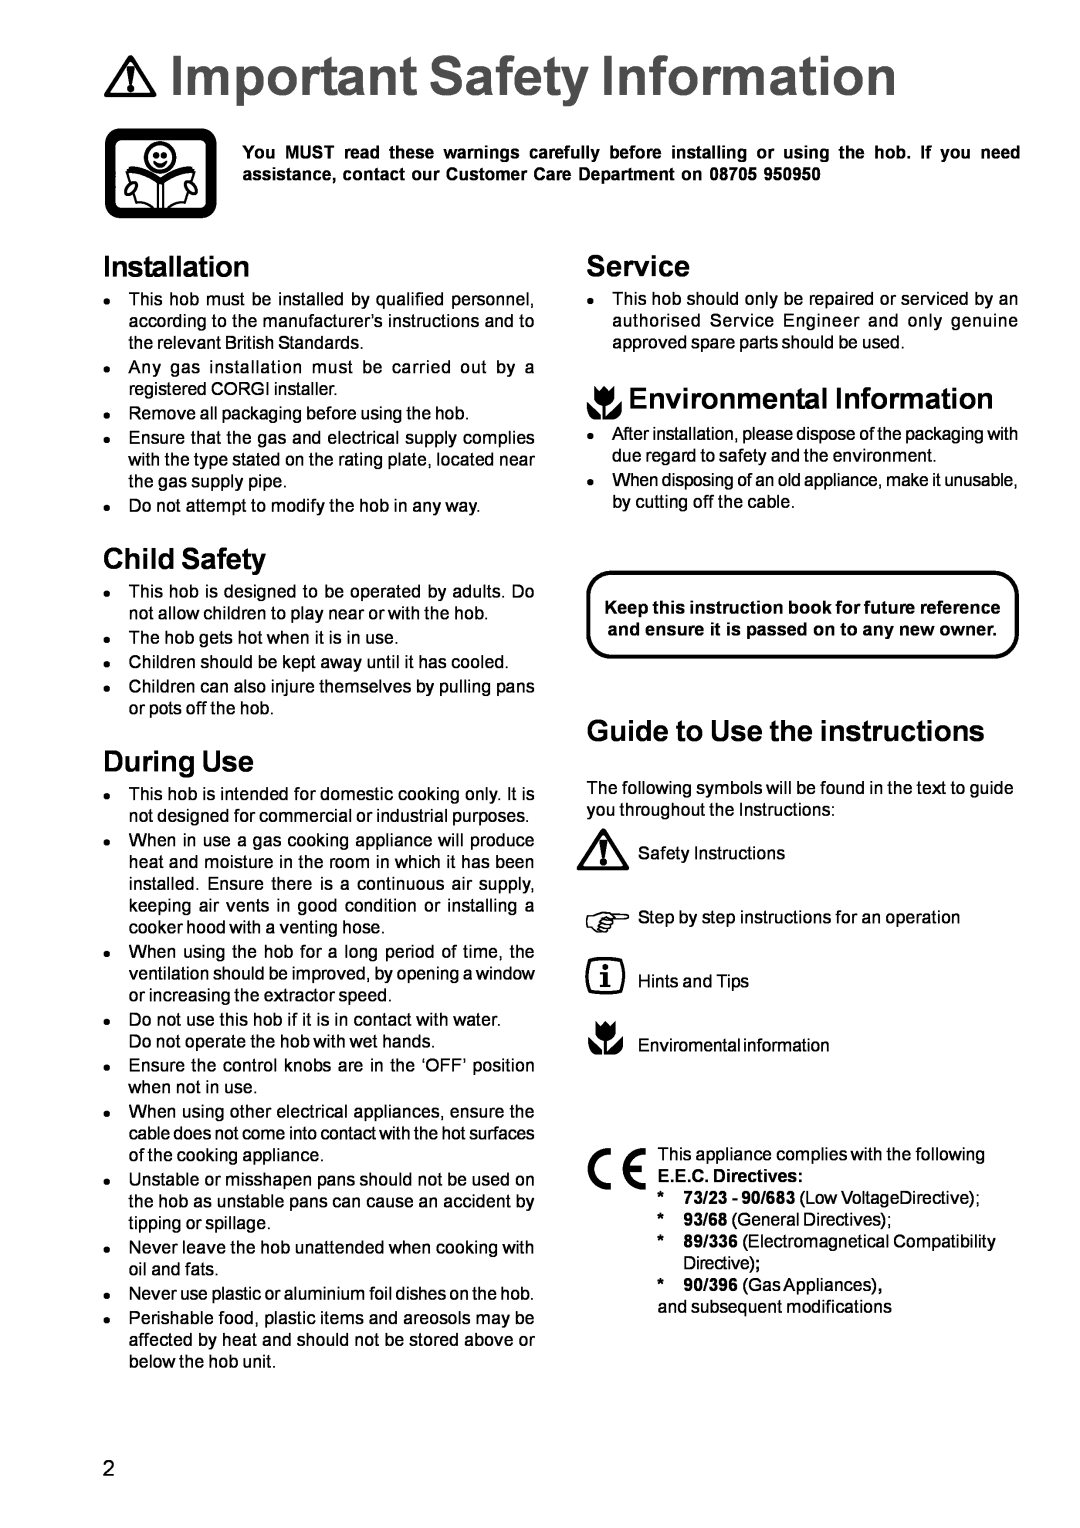 Electrolux EGG 689 manual Important Safety Information, Installation, Service, Environmental Information, Child Safety 